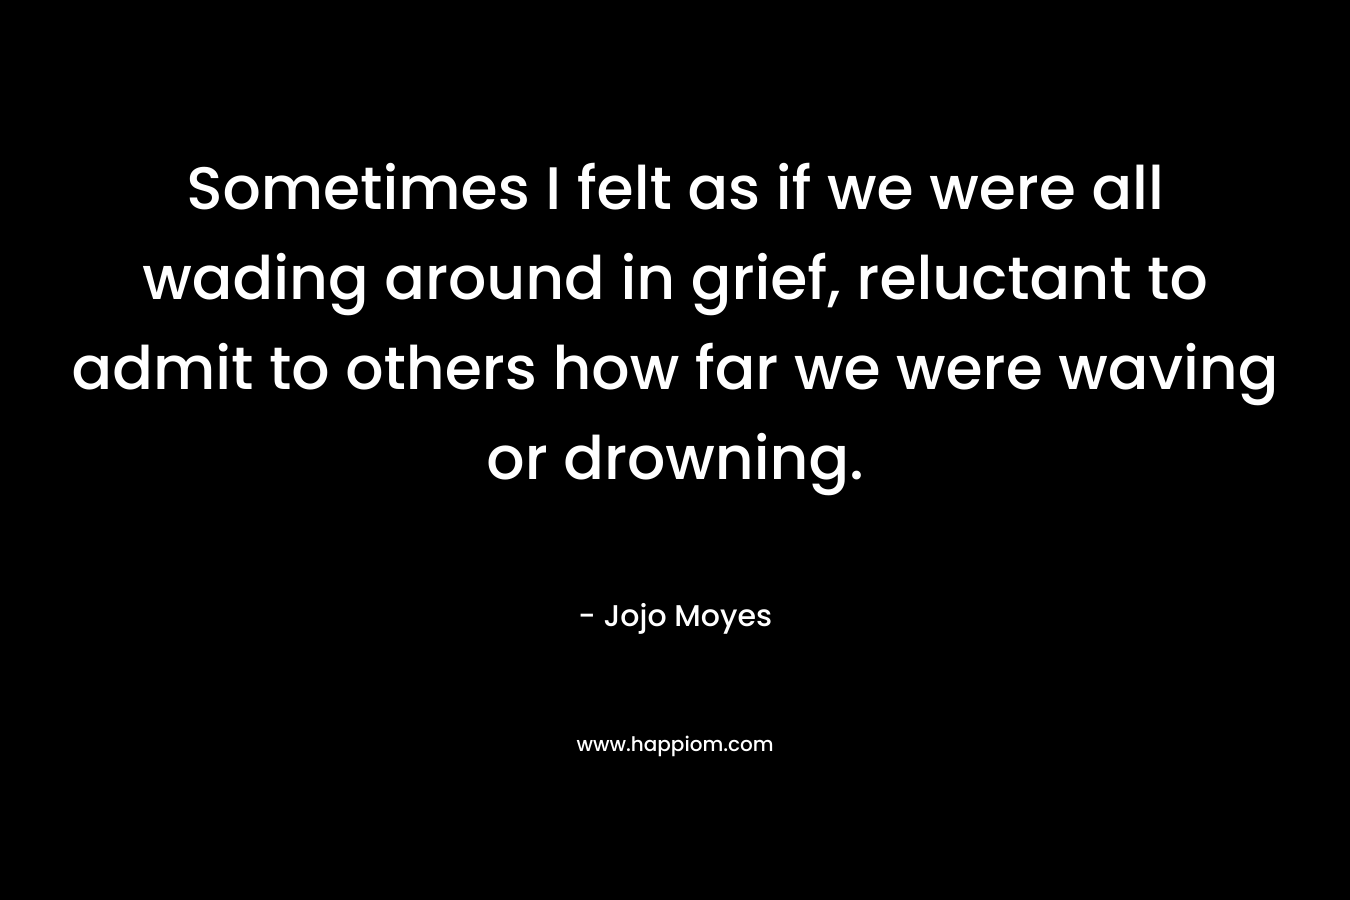 Sometimes I felt as if we were all wading around in grief, reluctant to admit to others how far we were waving or drowning. – Jojo Moyes